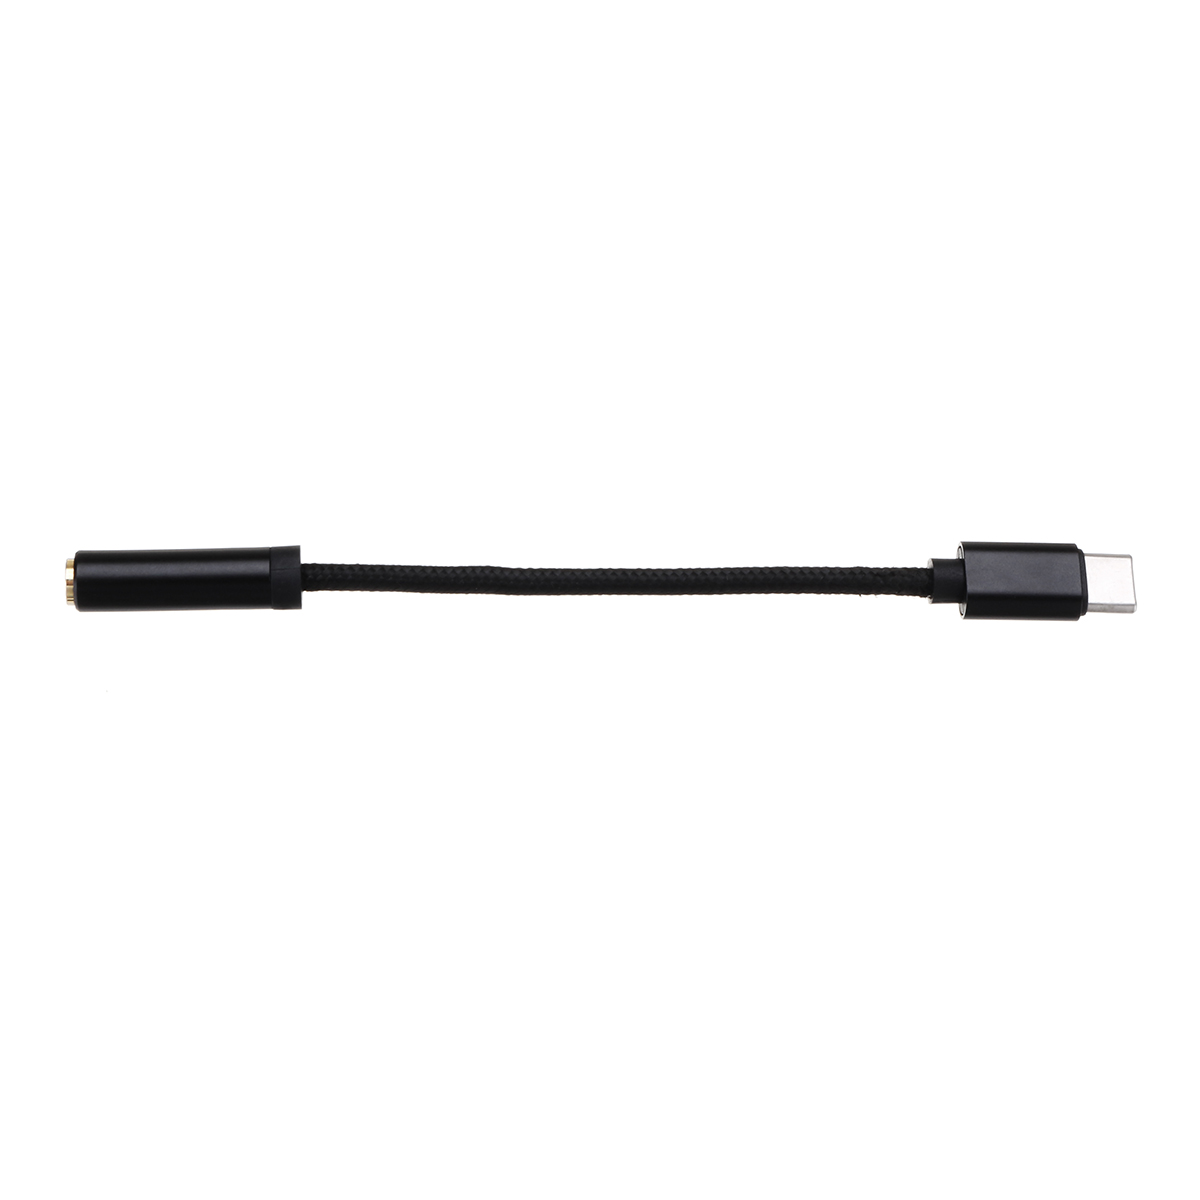 

USB-C Type-C 3.5mm Digital Male to Female Cable Headphone Adapter